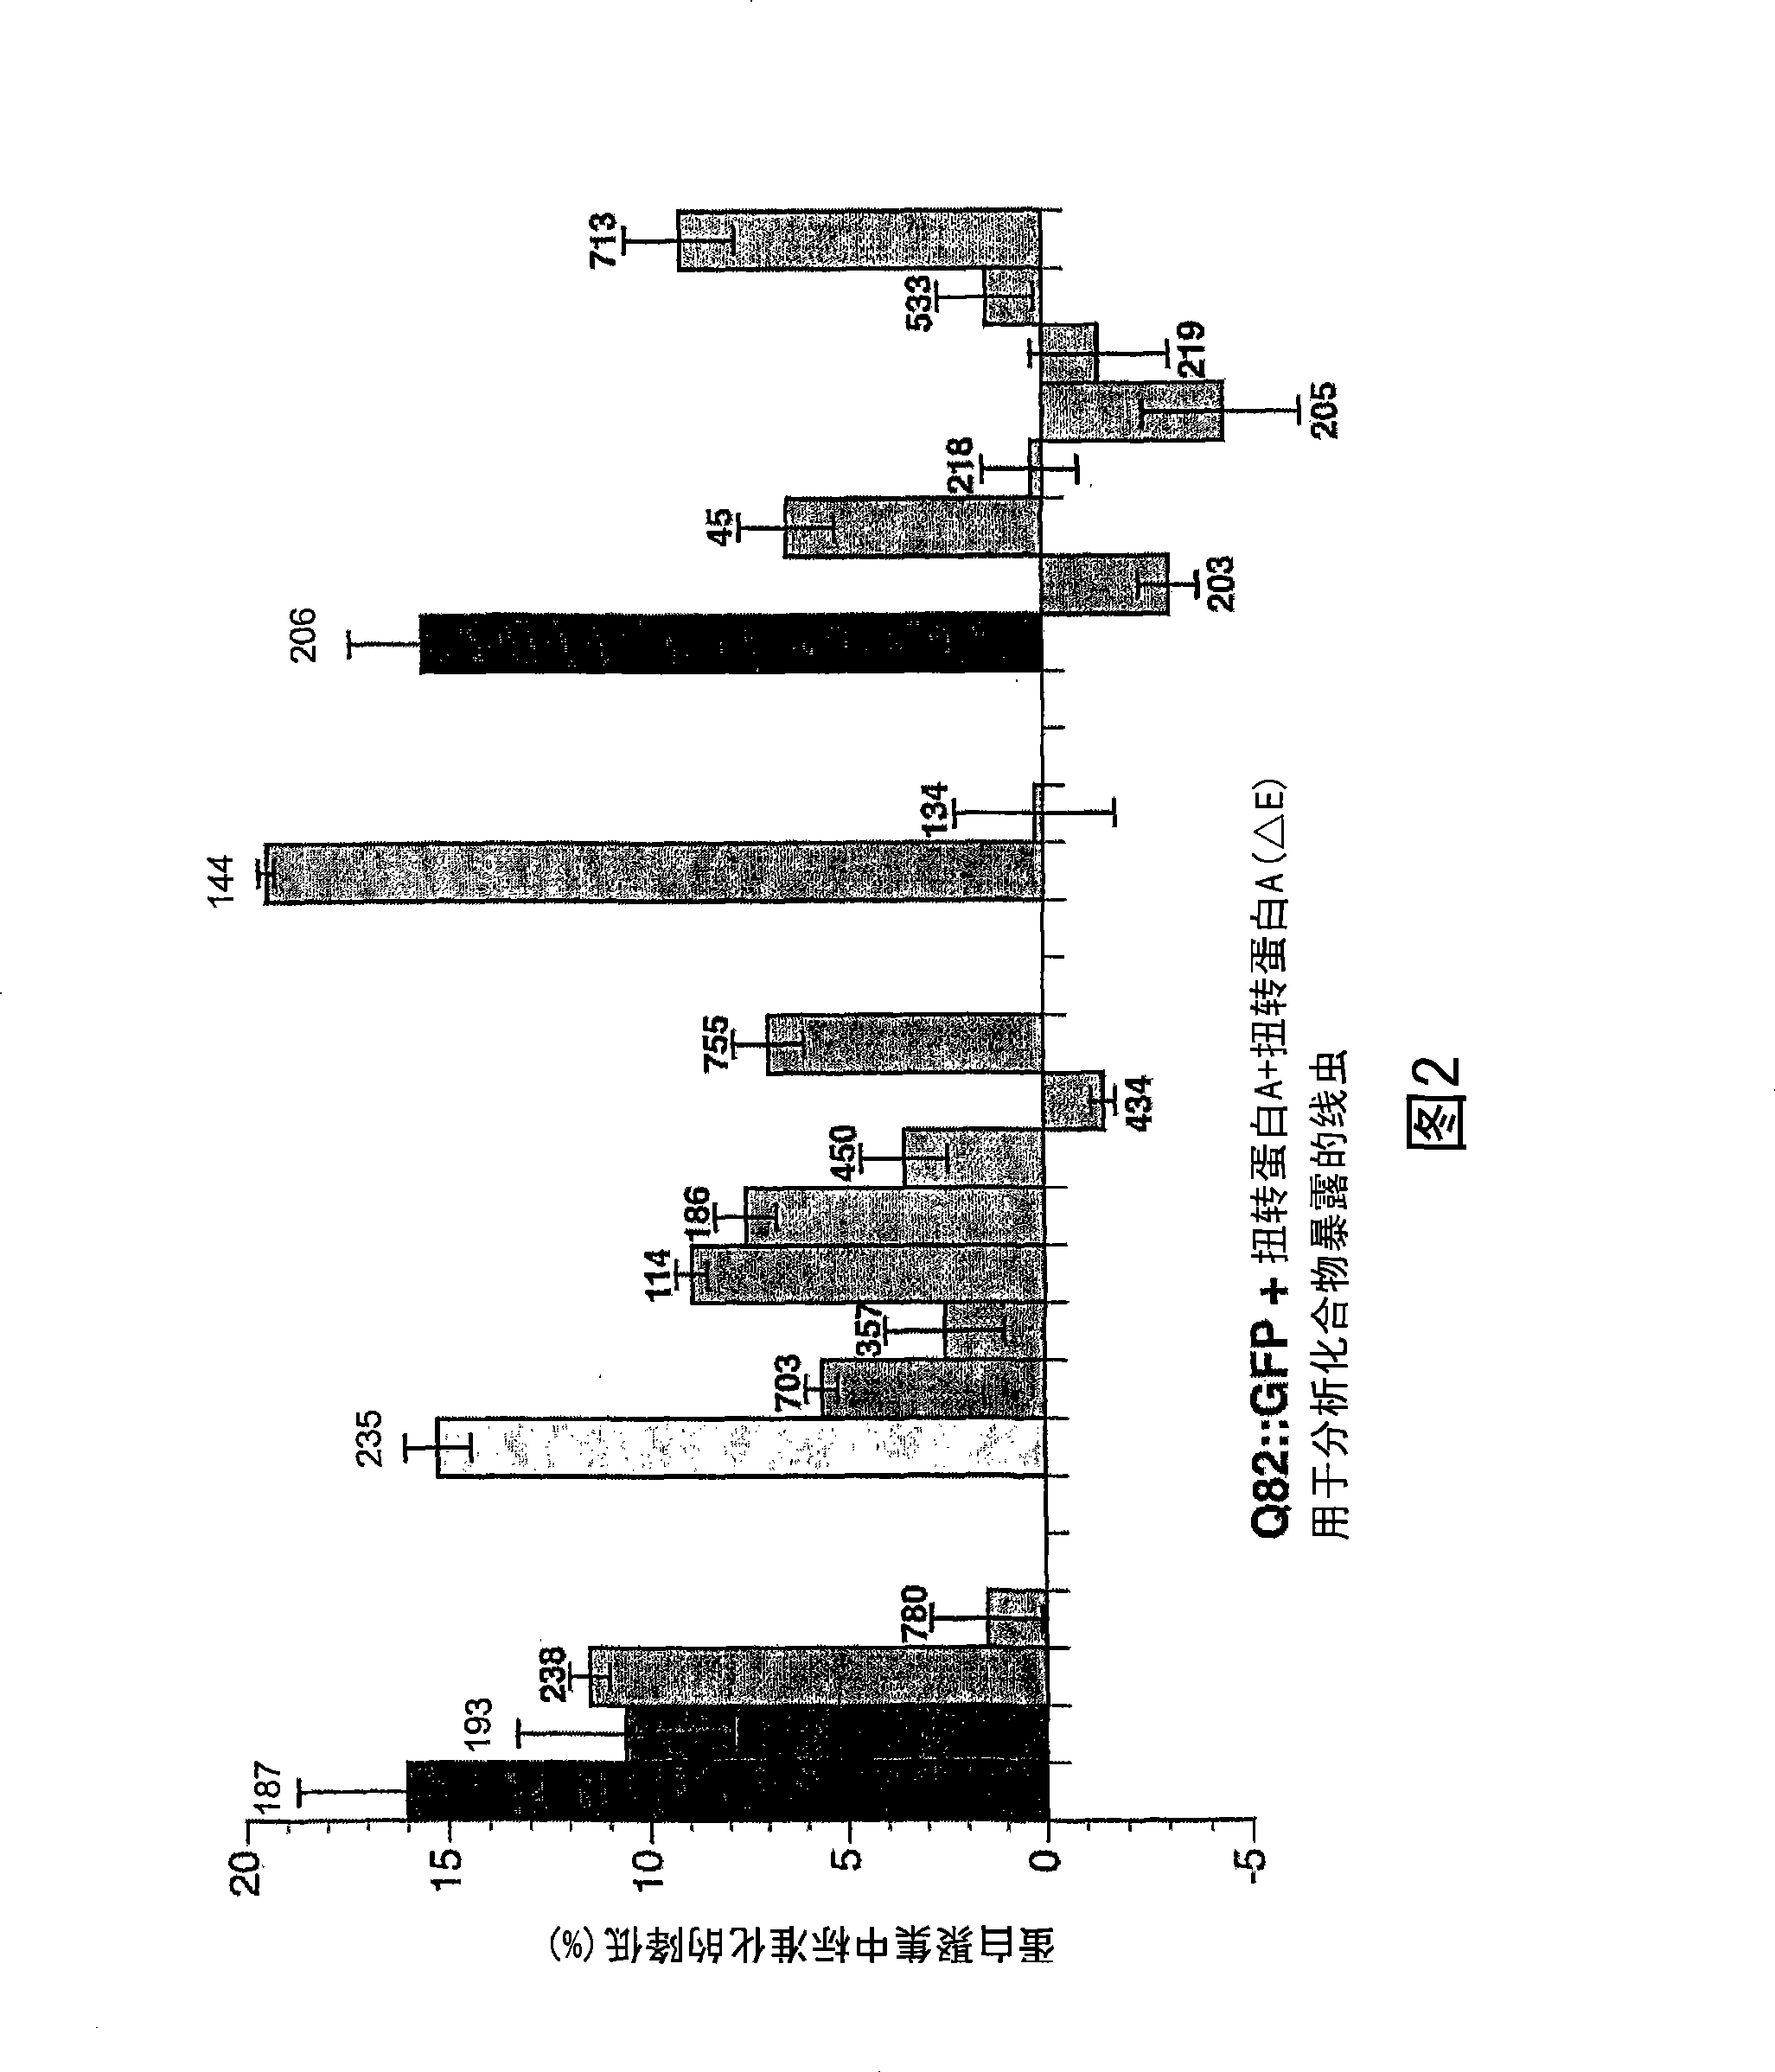 Methods of using small molecule compounds for neuroprotection